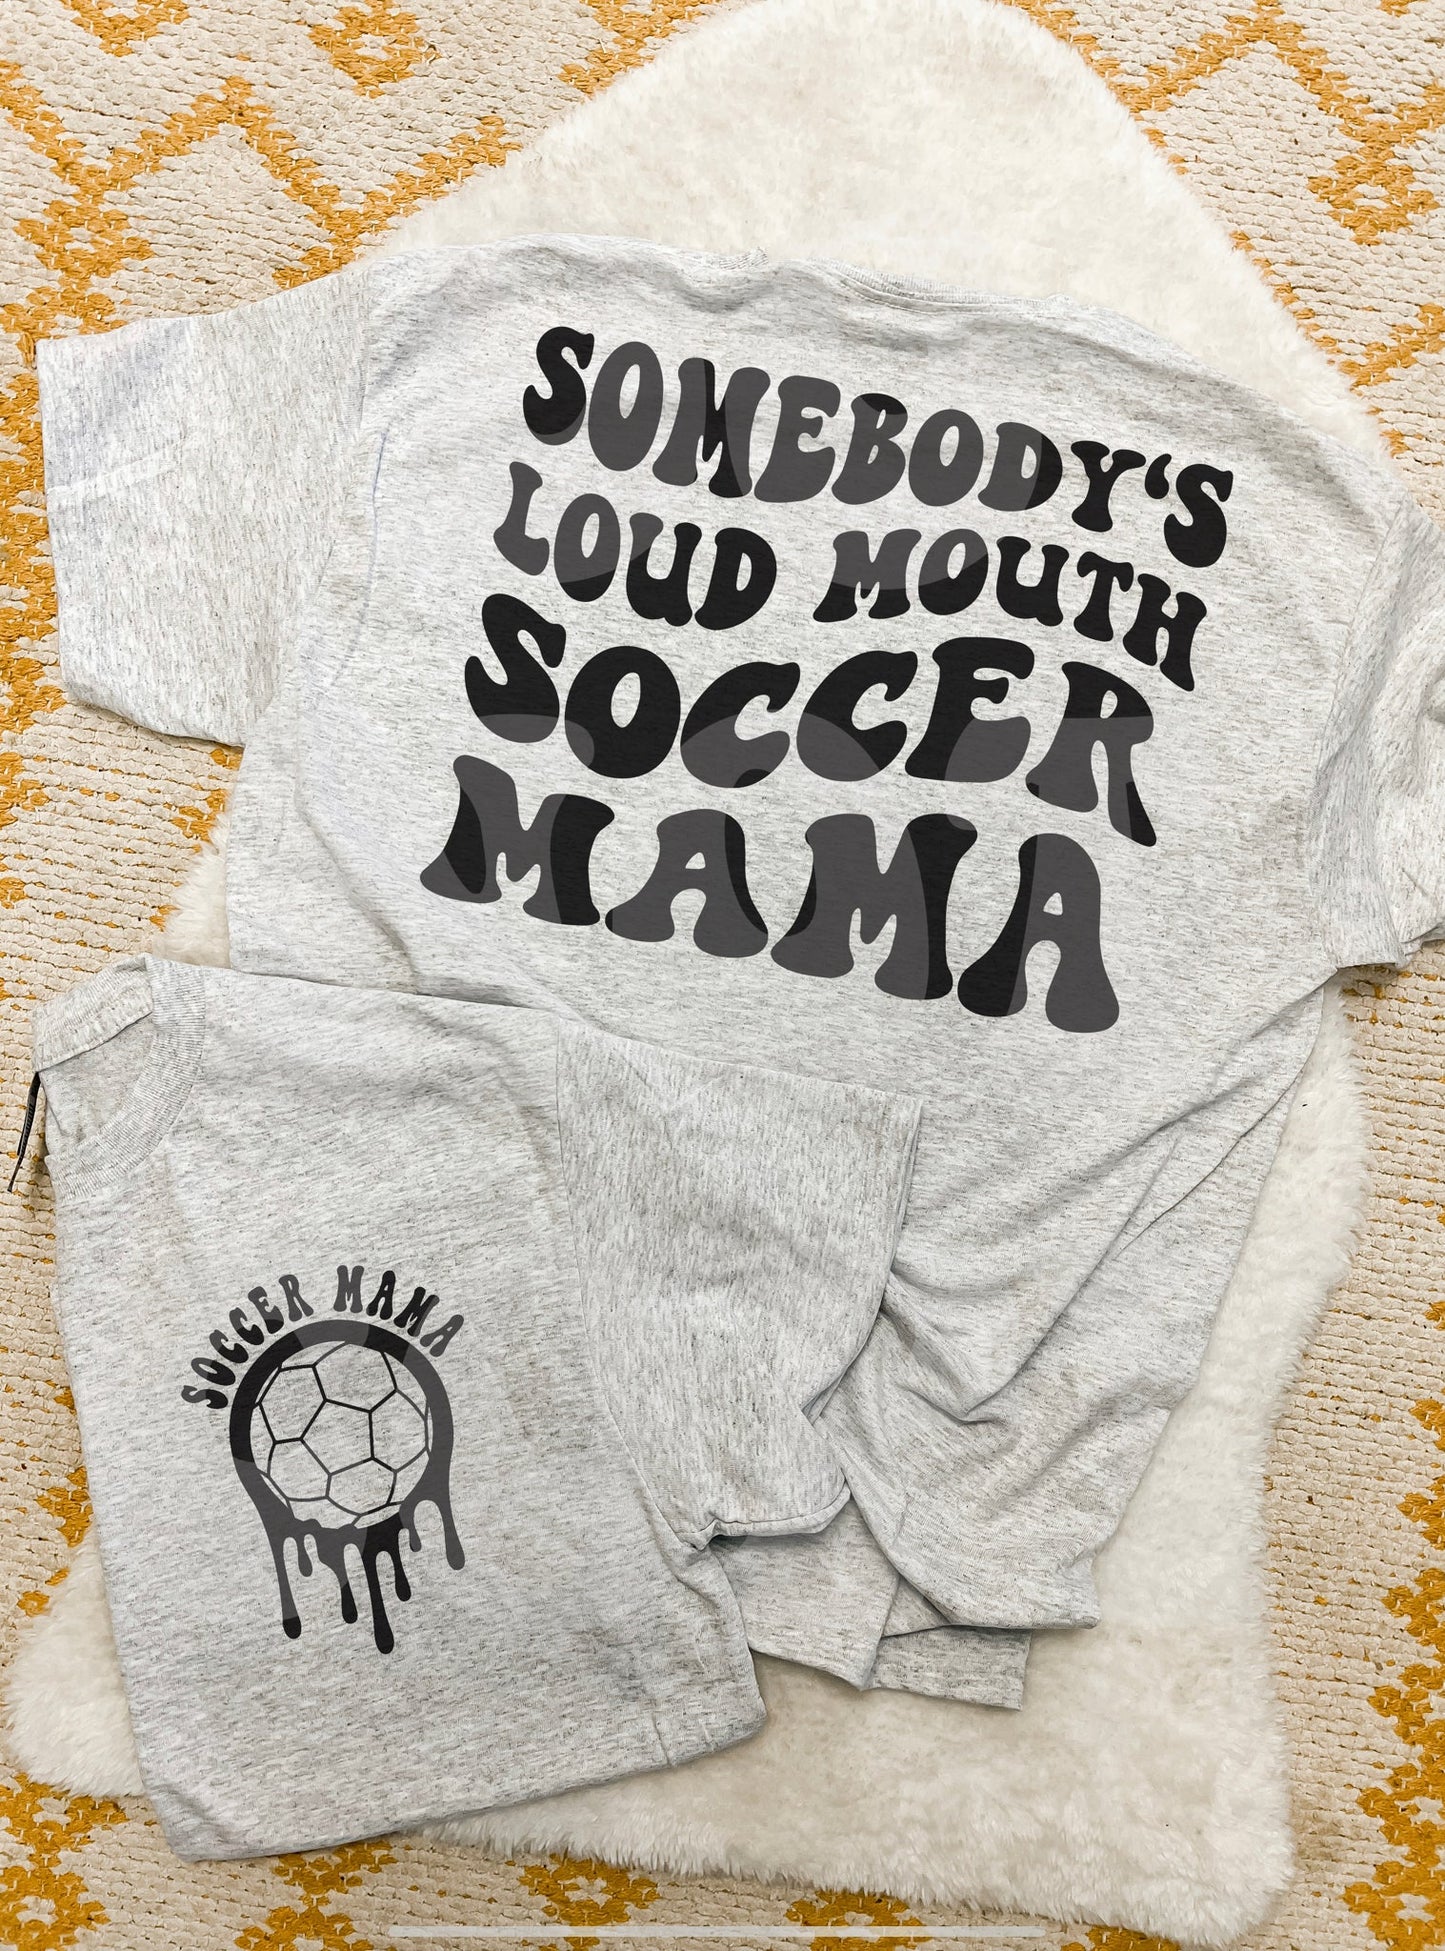 Loud Mouth Soccer Mama - WS